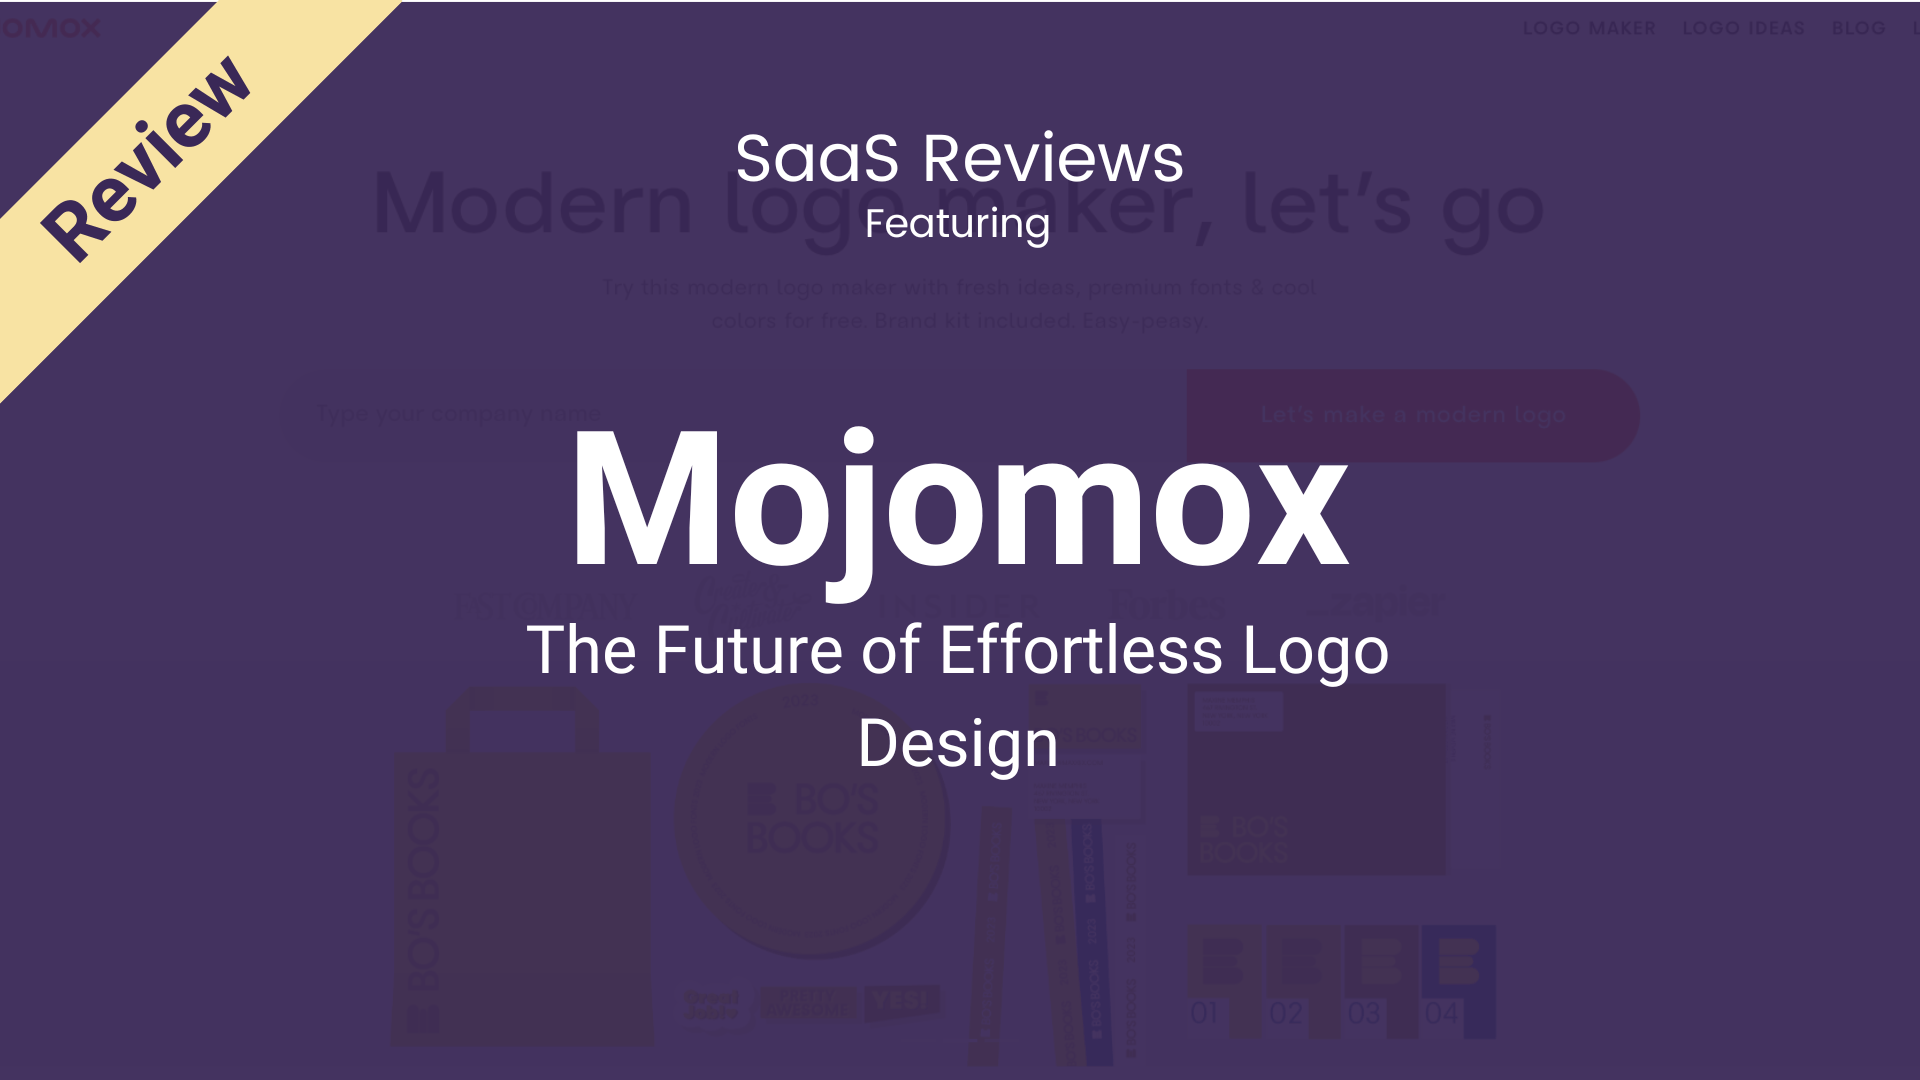 Mojomox Review: The Future of Effortless Logo Design